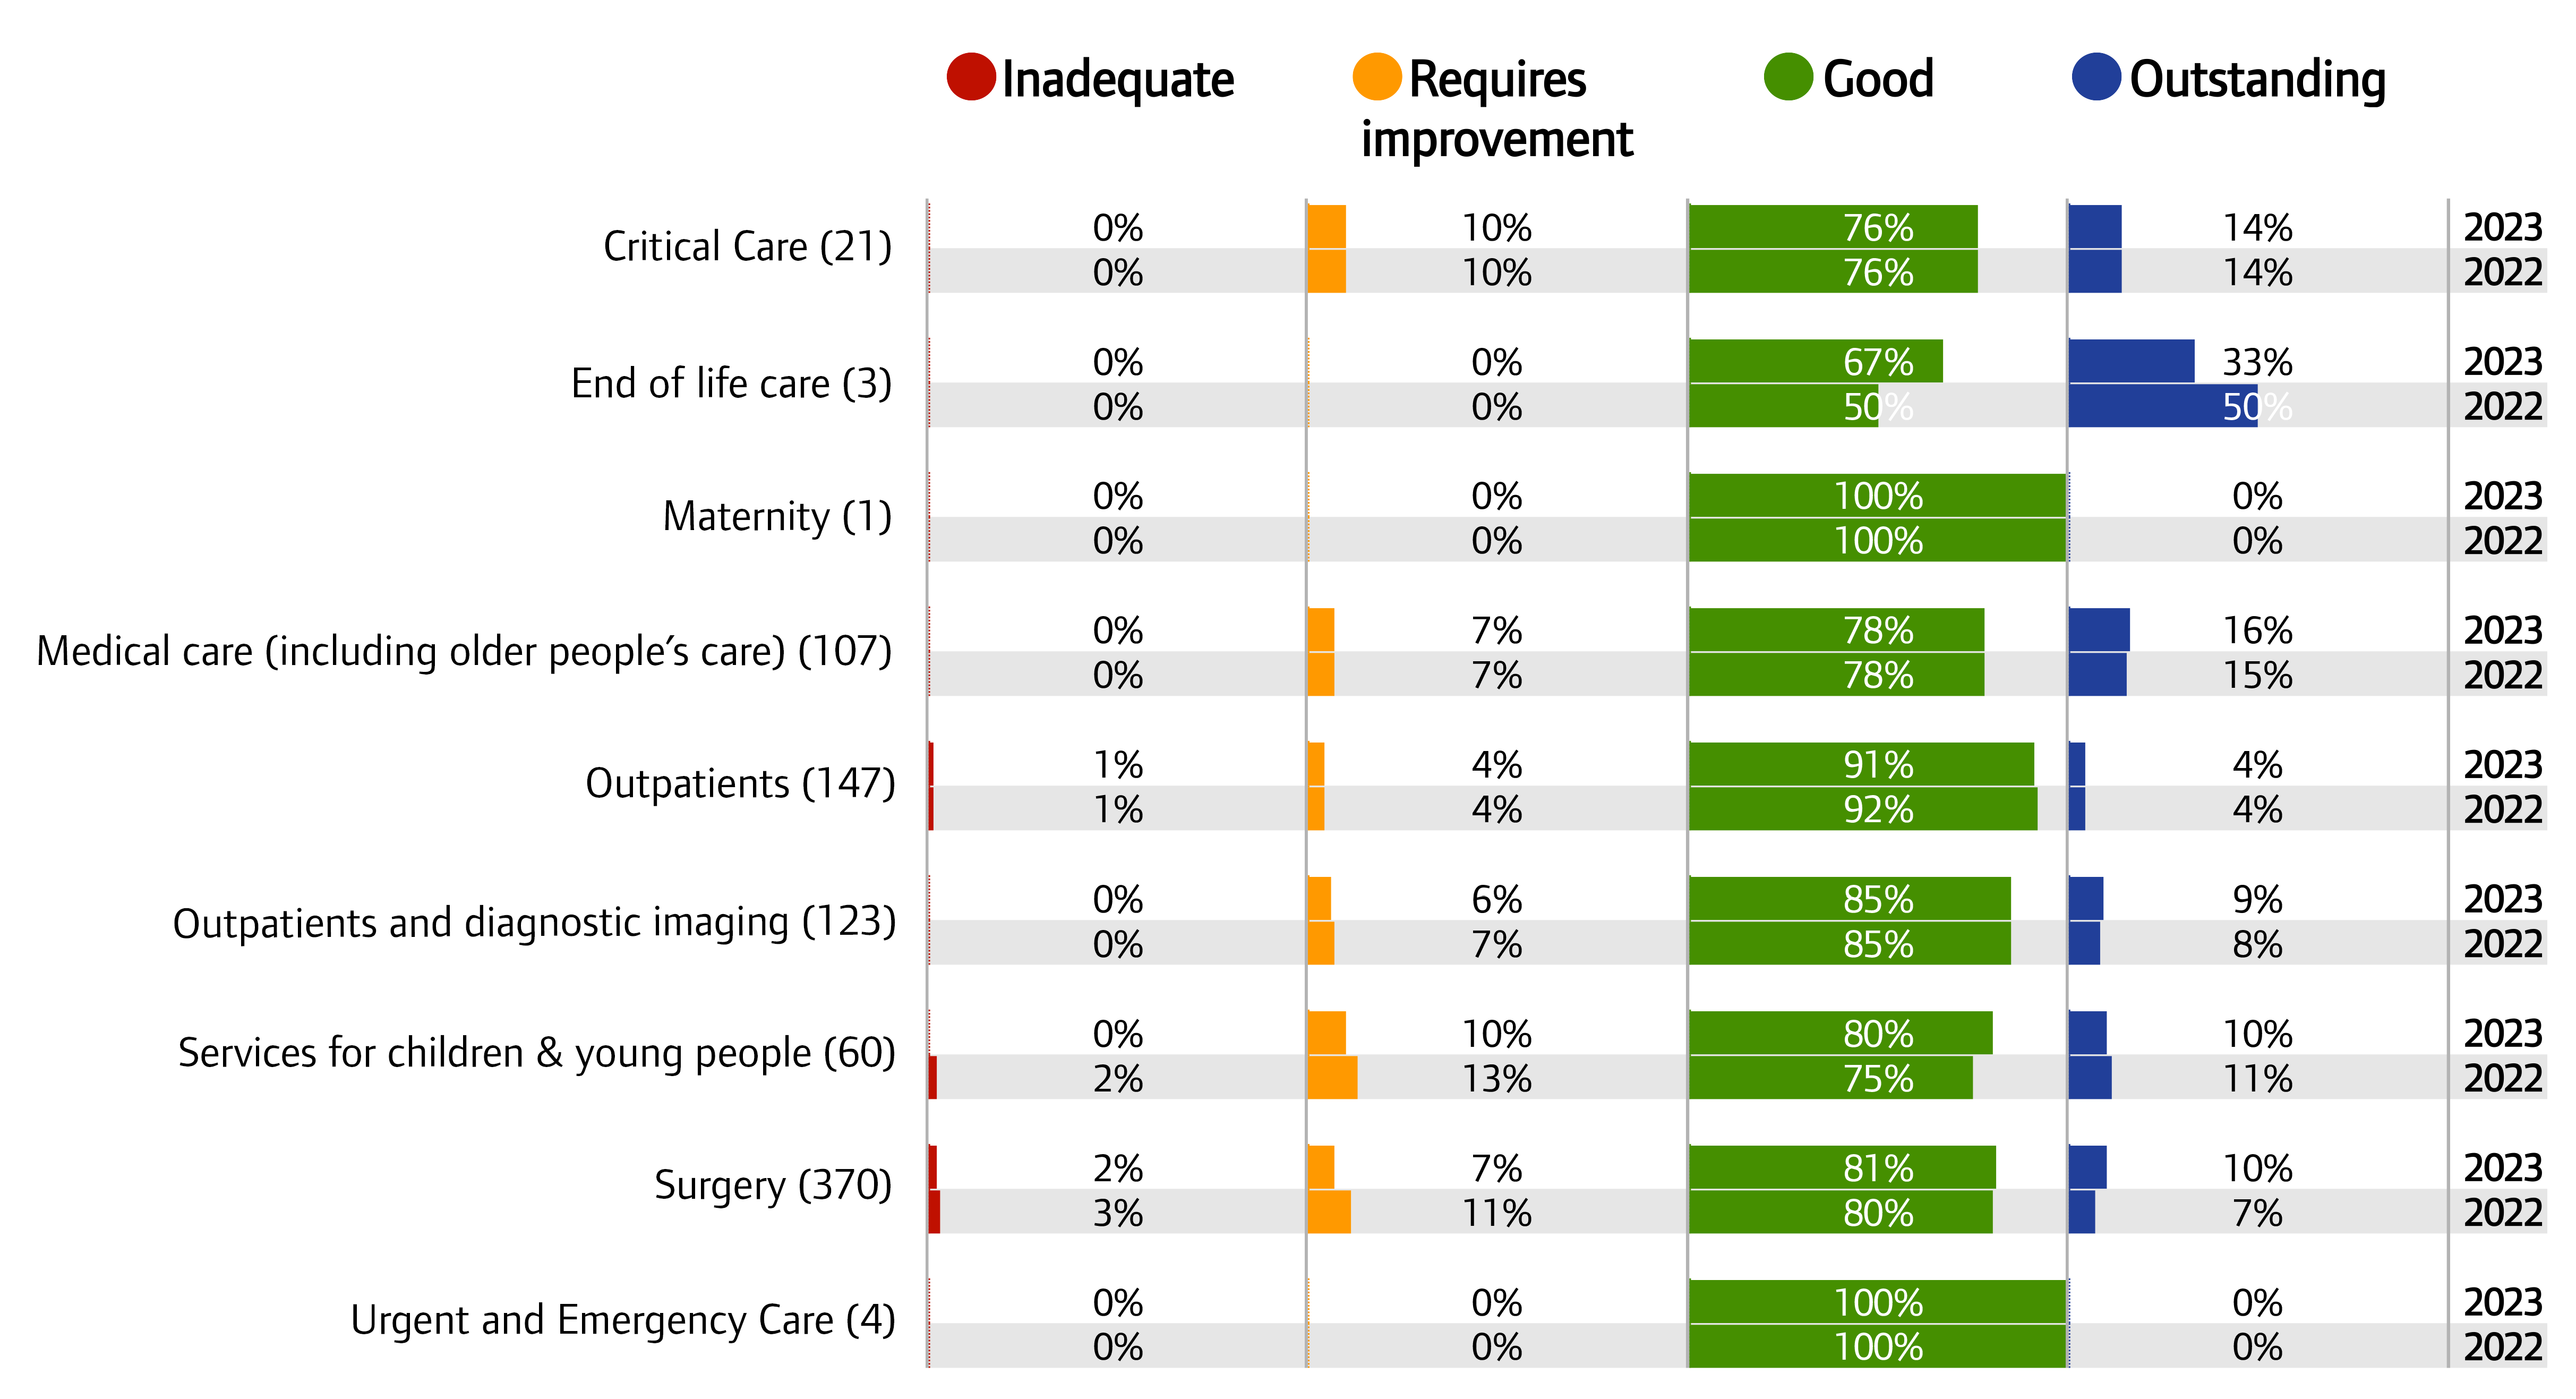 Chart showing overall ratings for independent acute core services